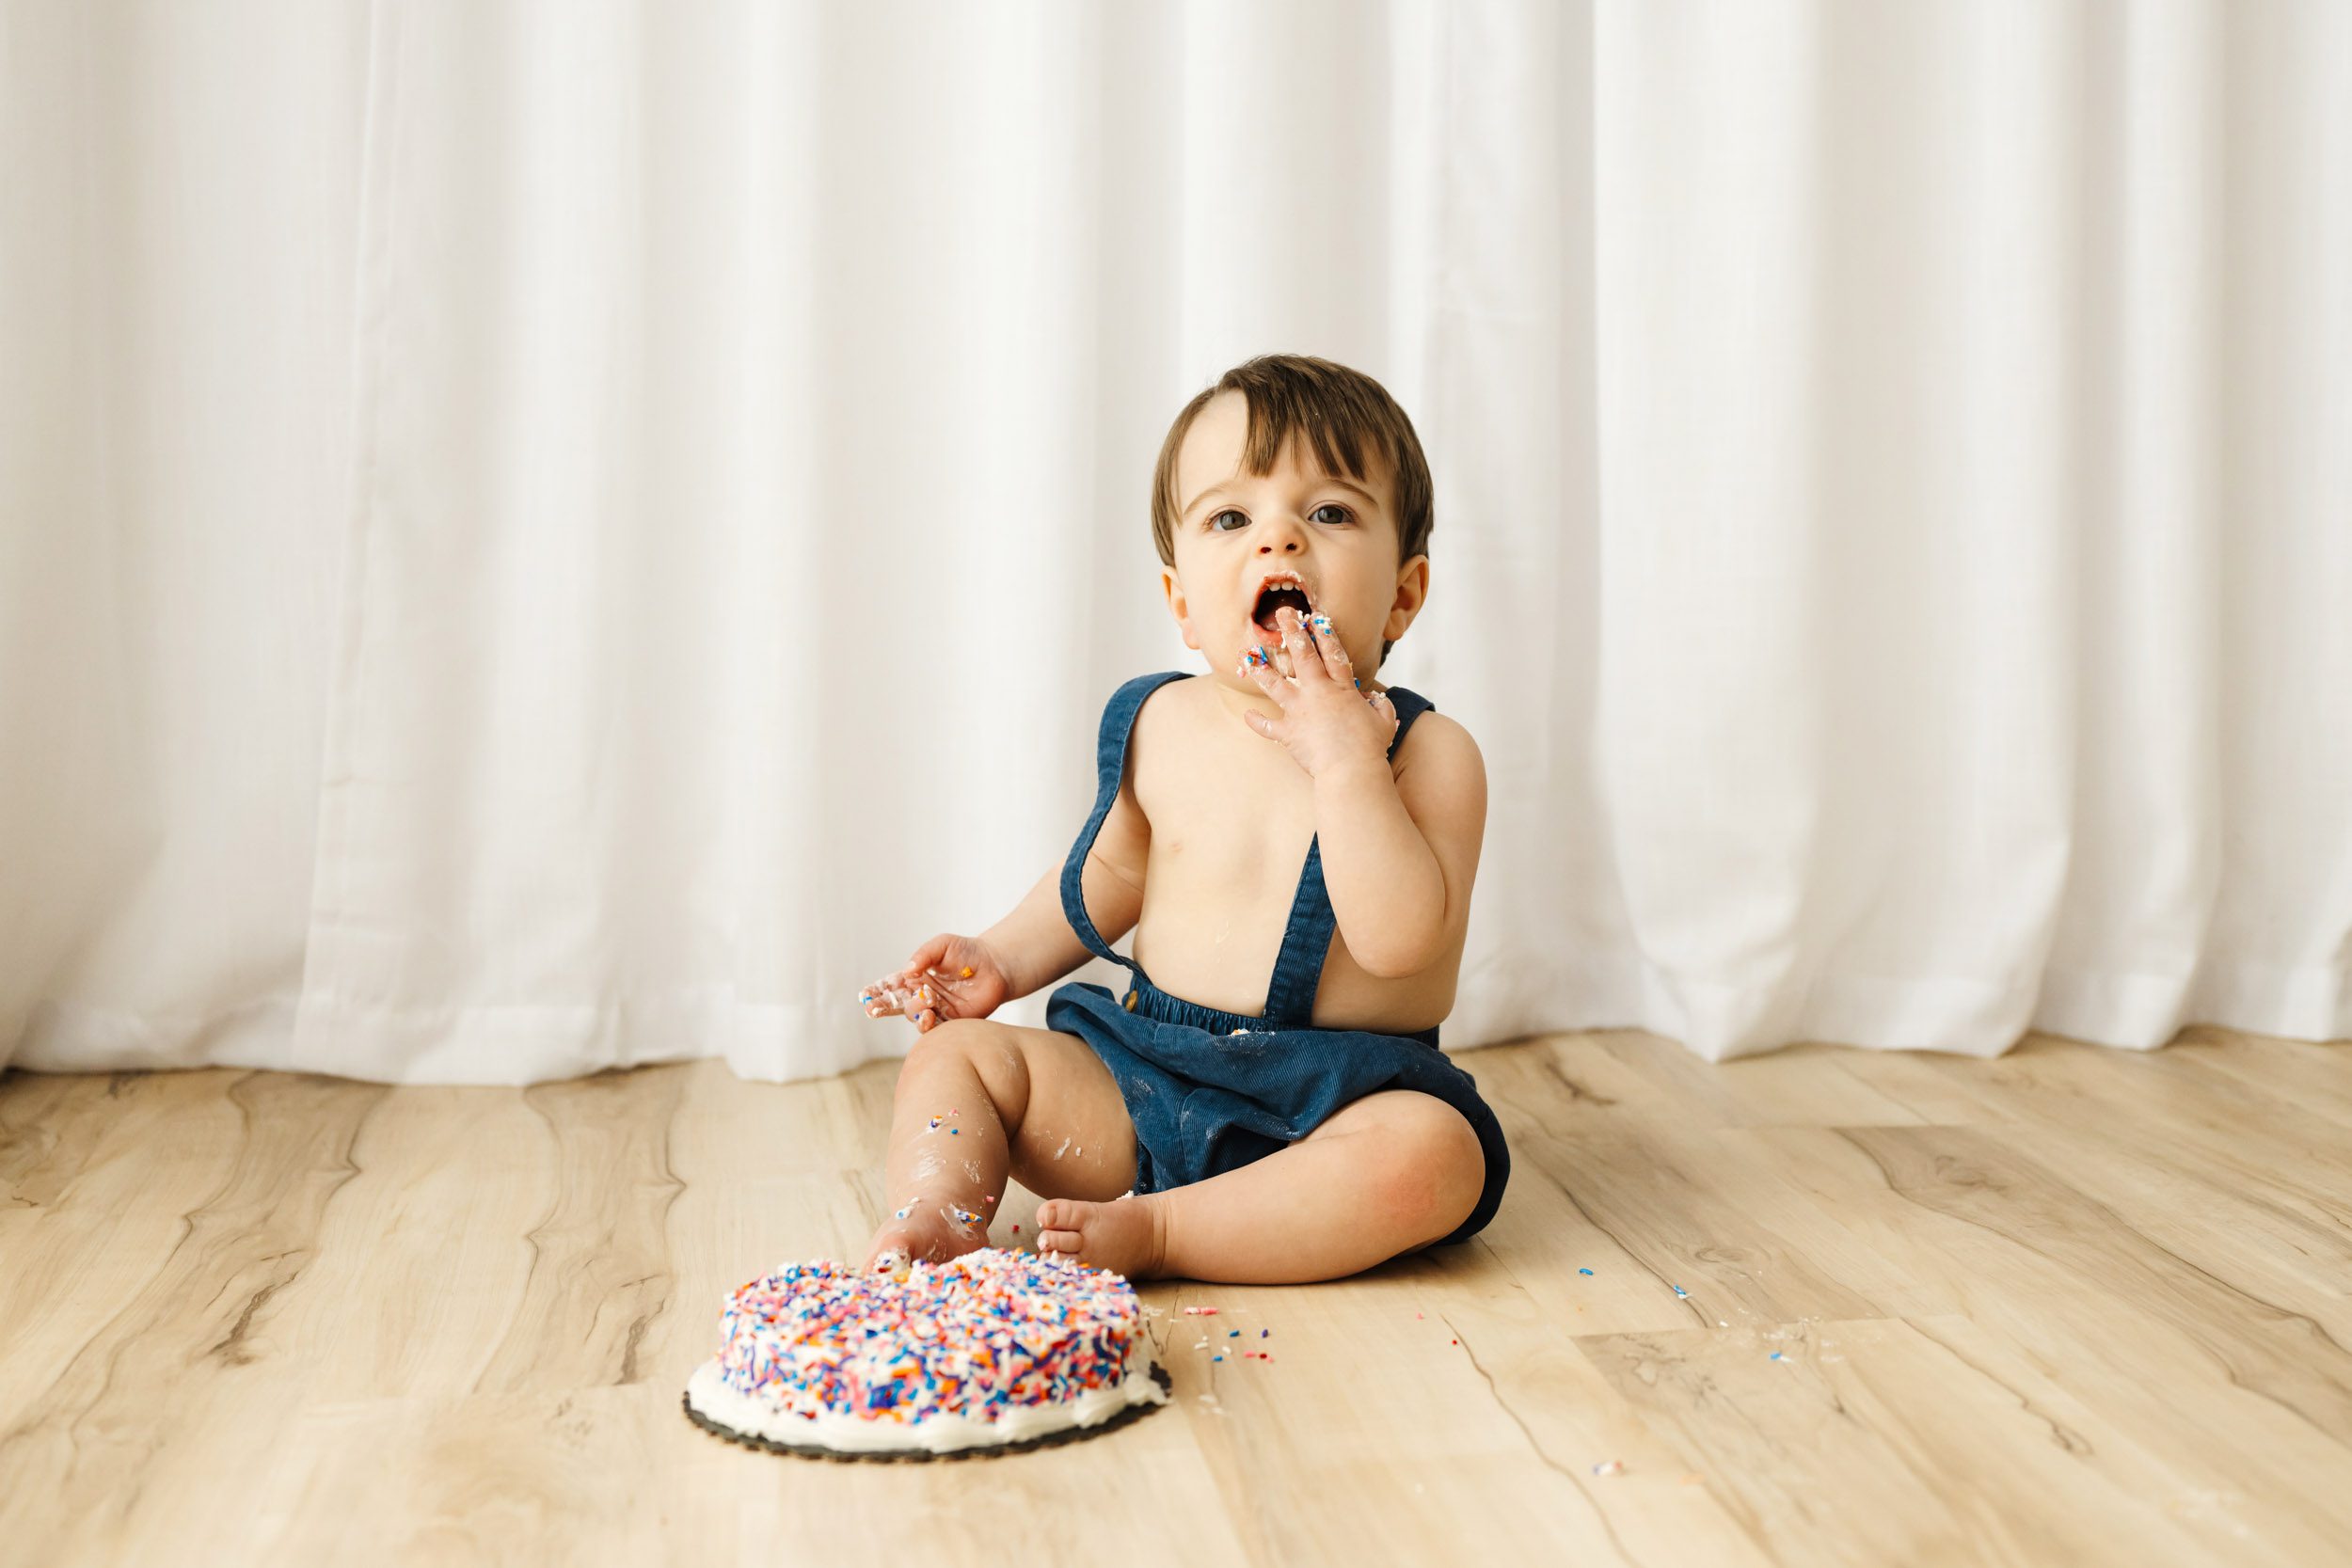 a young boy sitting the floor in front of a wall of white curtains and eating a cake covered with colorful sprinkles during a 1st birthday cake smash photoshoot